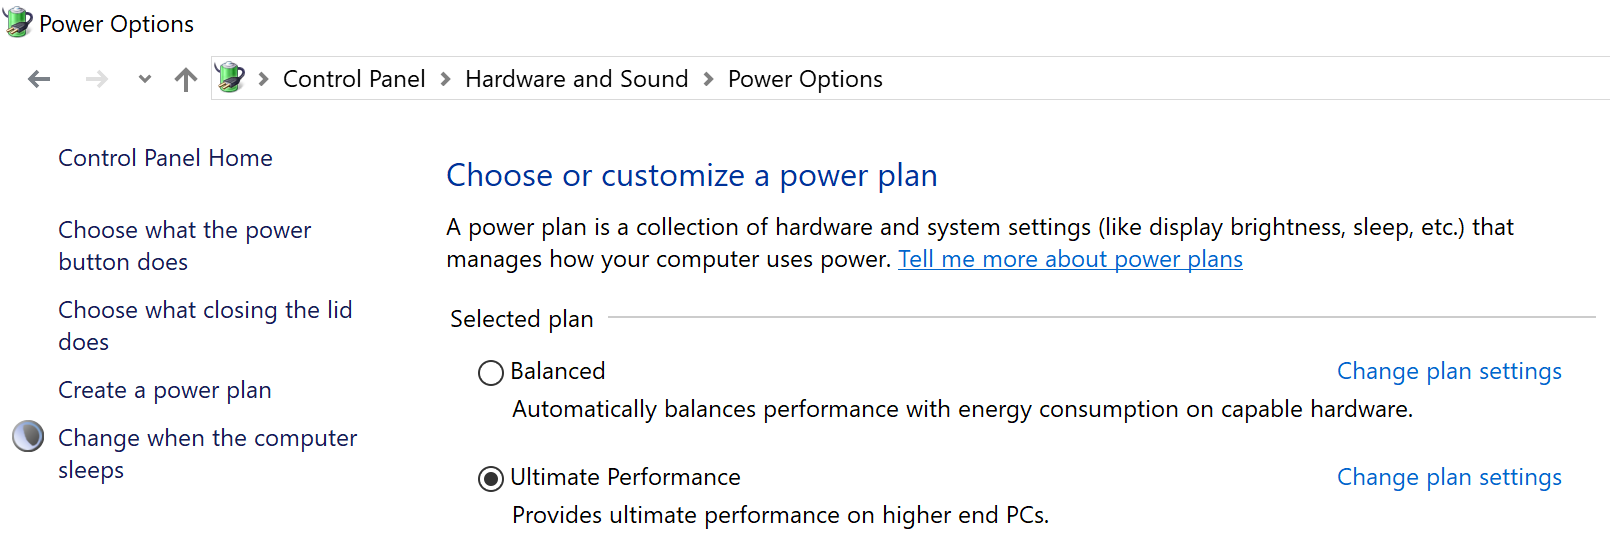 Windows 10 Ultimate Performance power plan policy